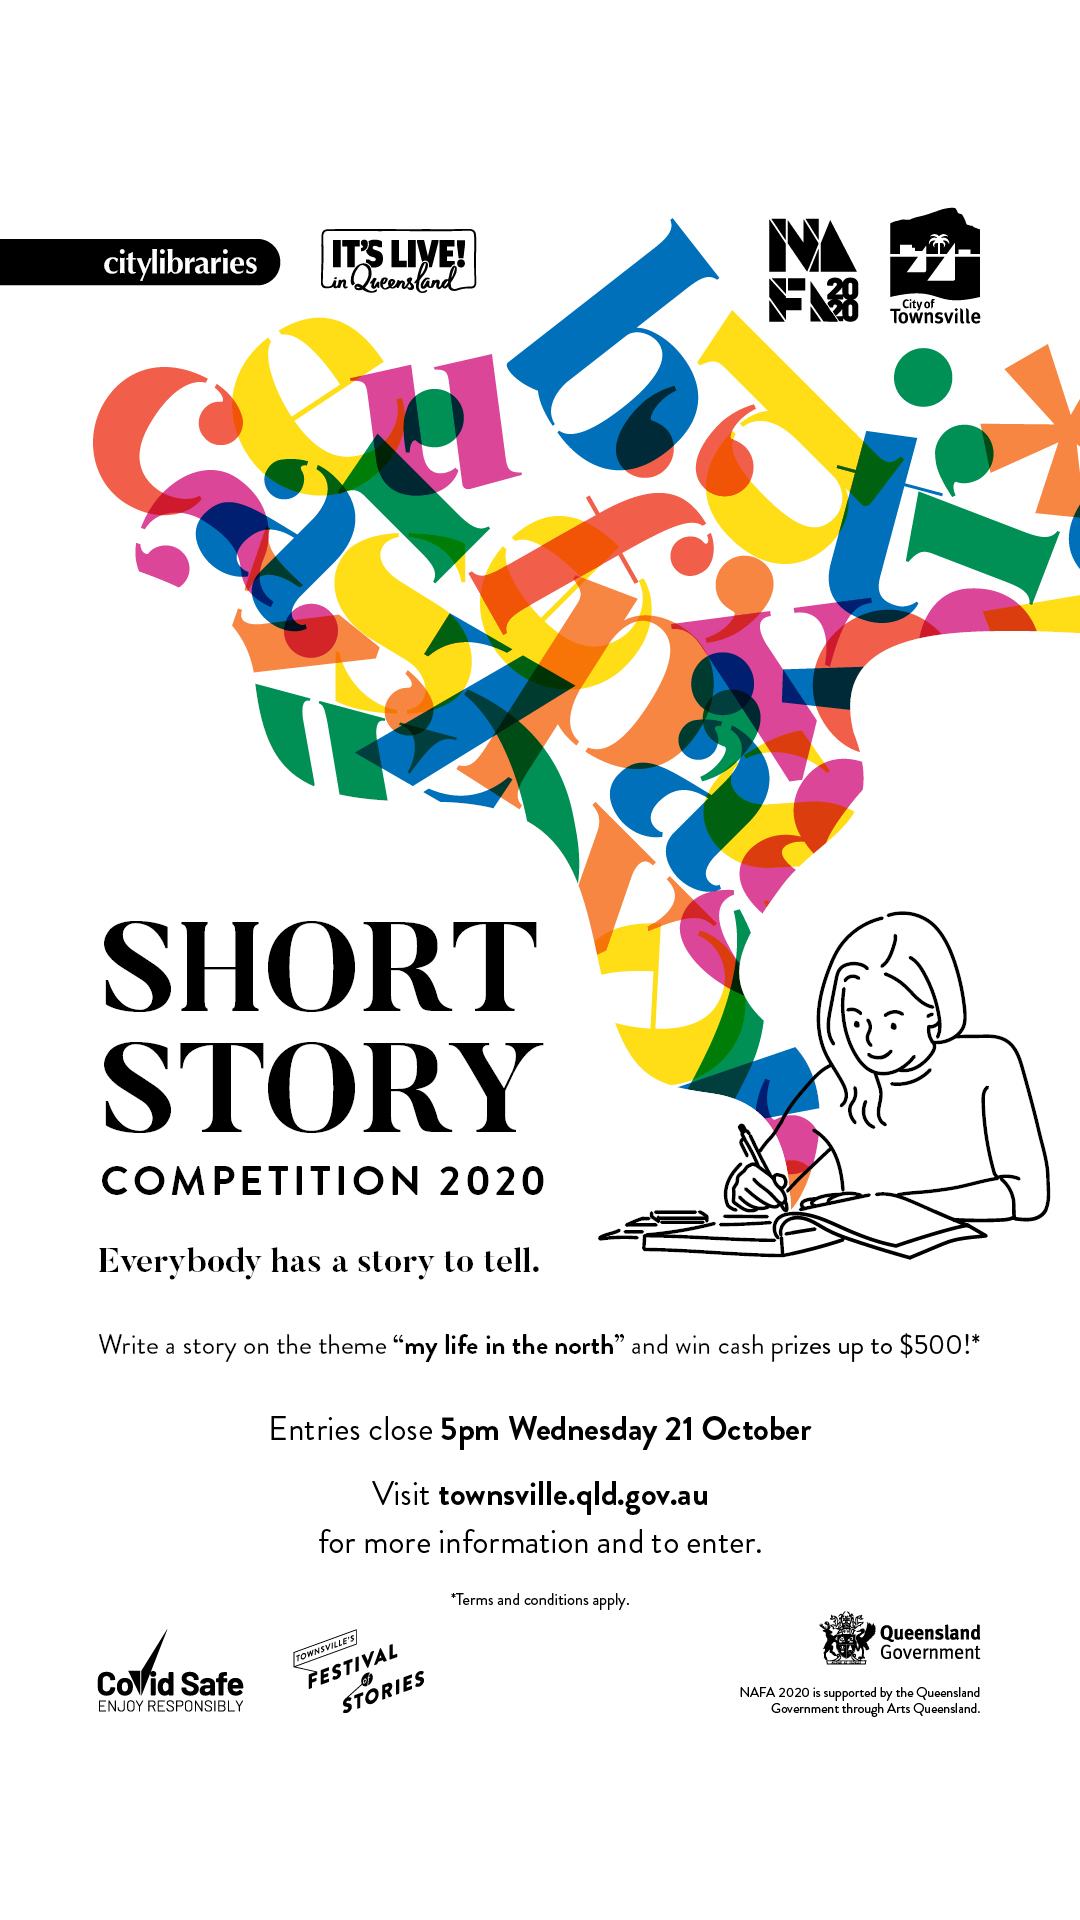 Short Story Competition Townsville City Council